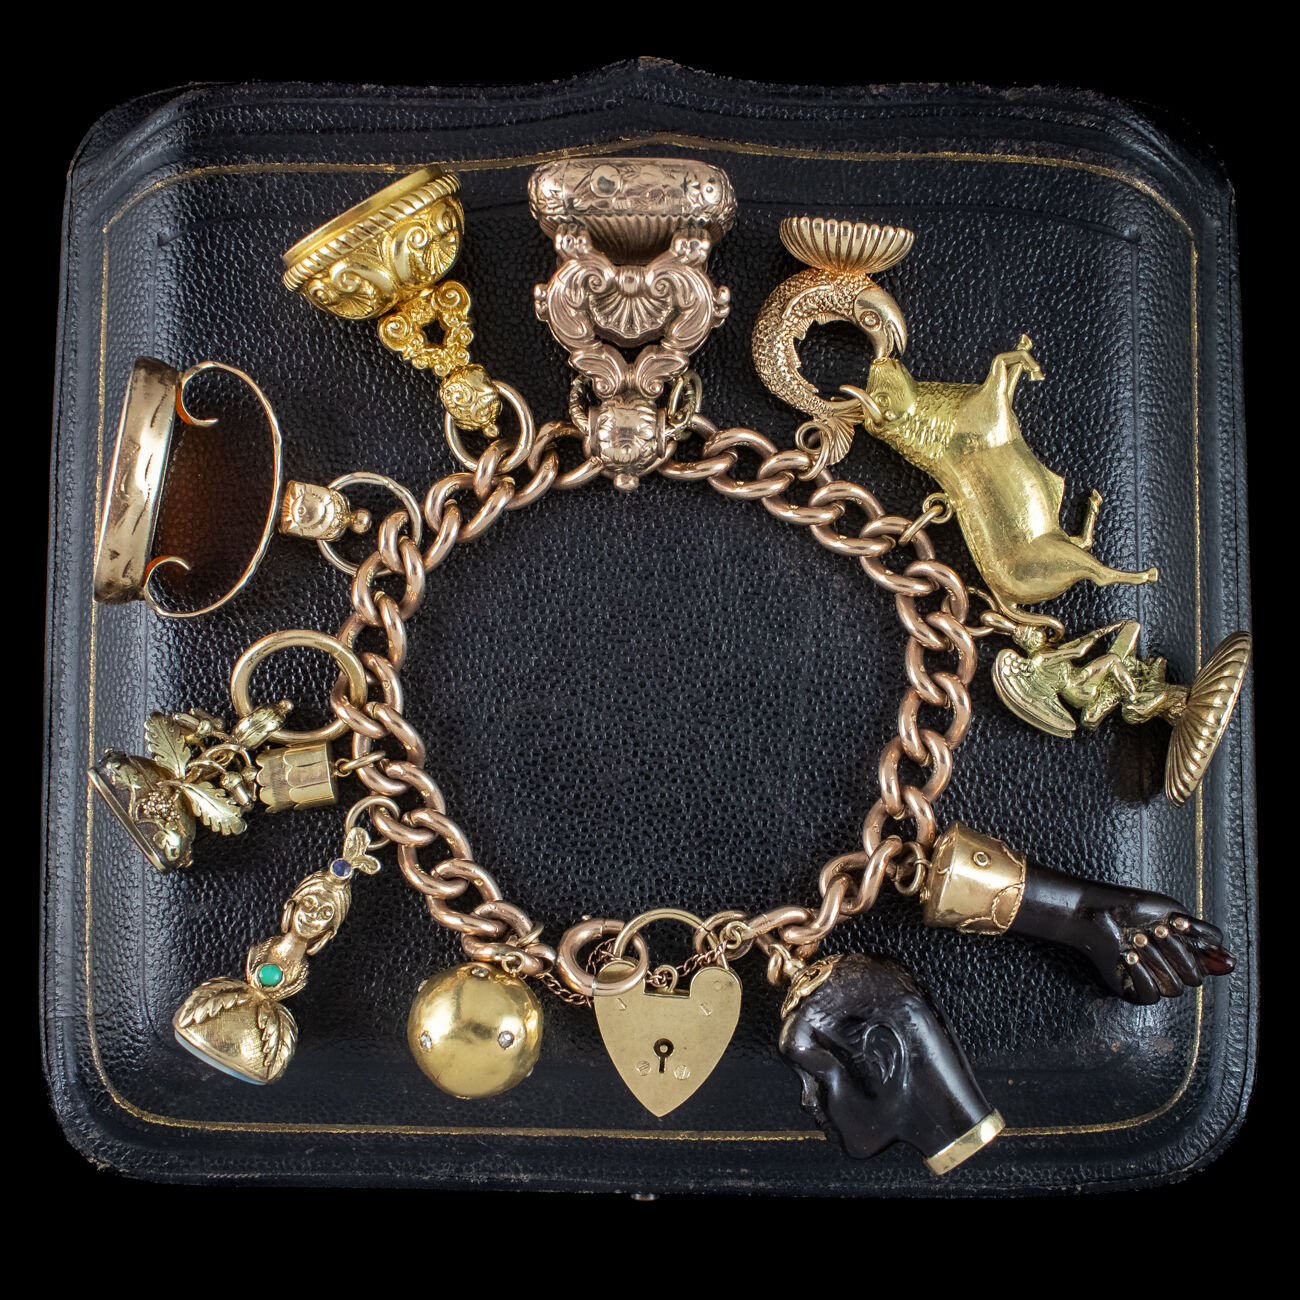 Antique Victorian Charm Bracelet With 12 Charms And Fobs